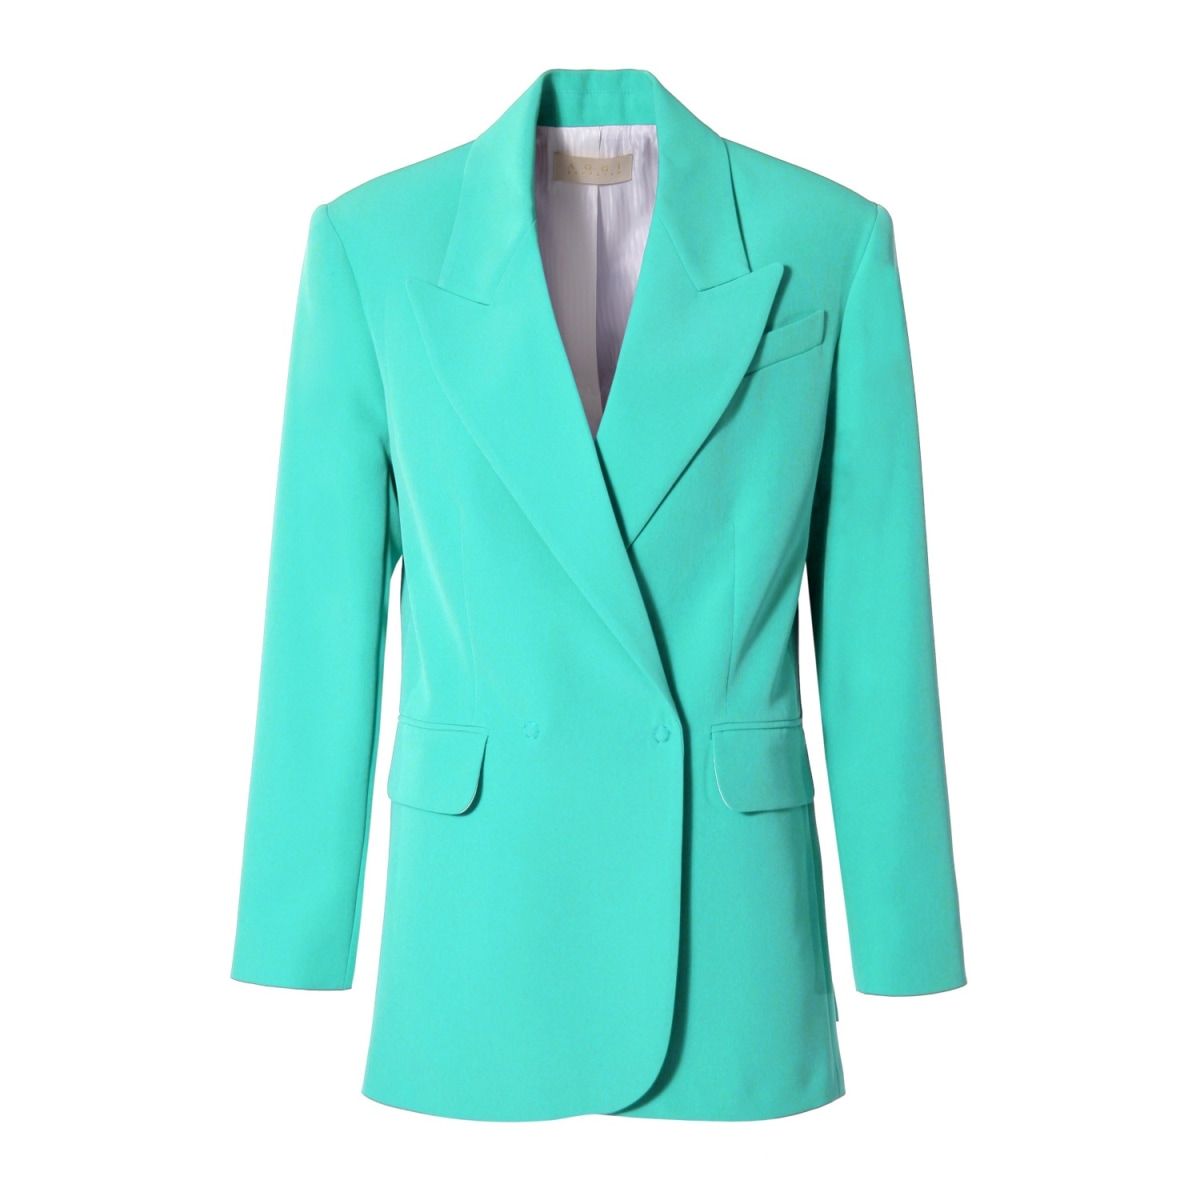 Blair Mexicali Turquoise Blazer | Wolf & Badger (US)